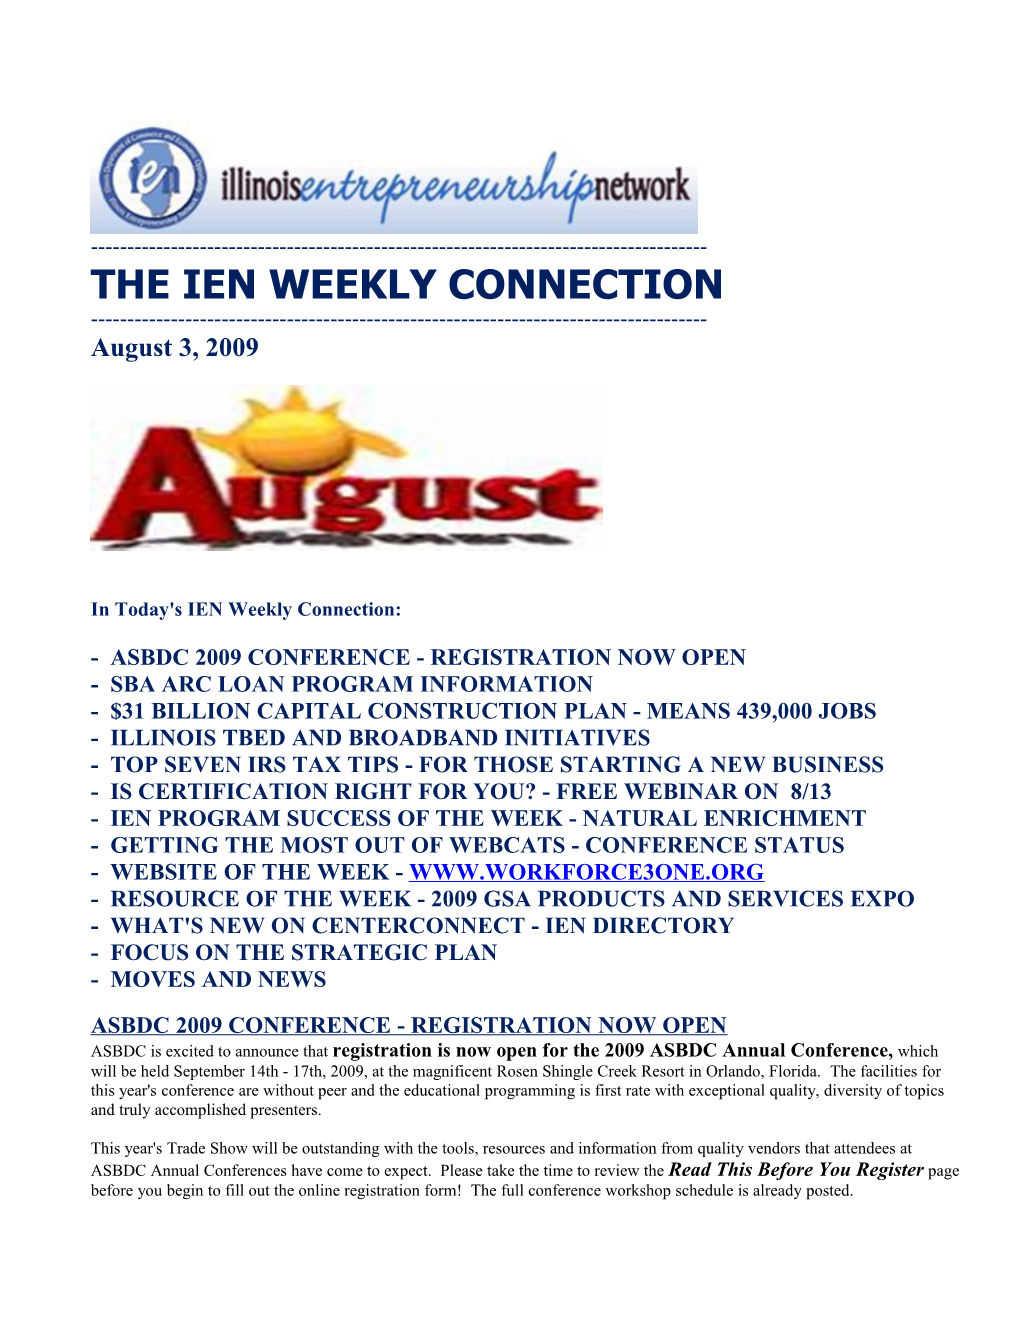 In Today'sien Weekly Connection s8